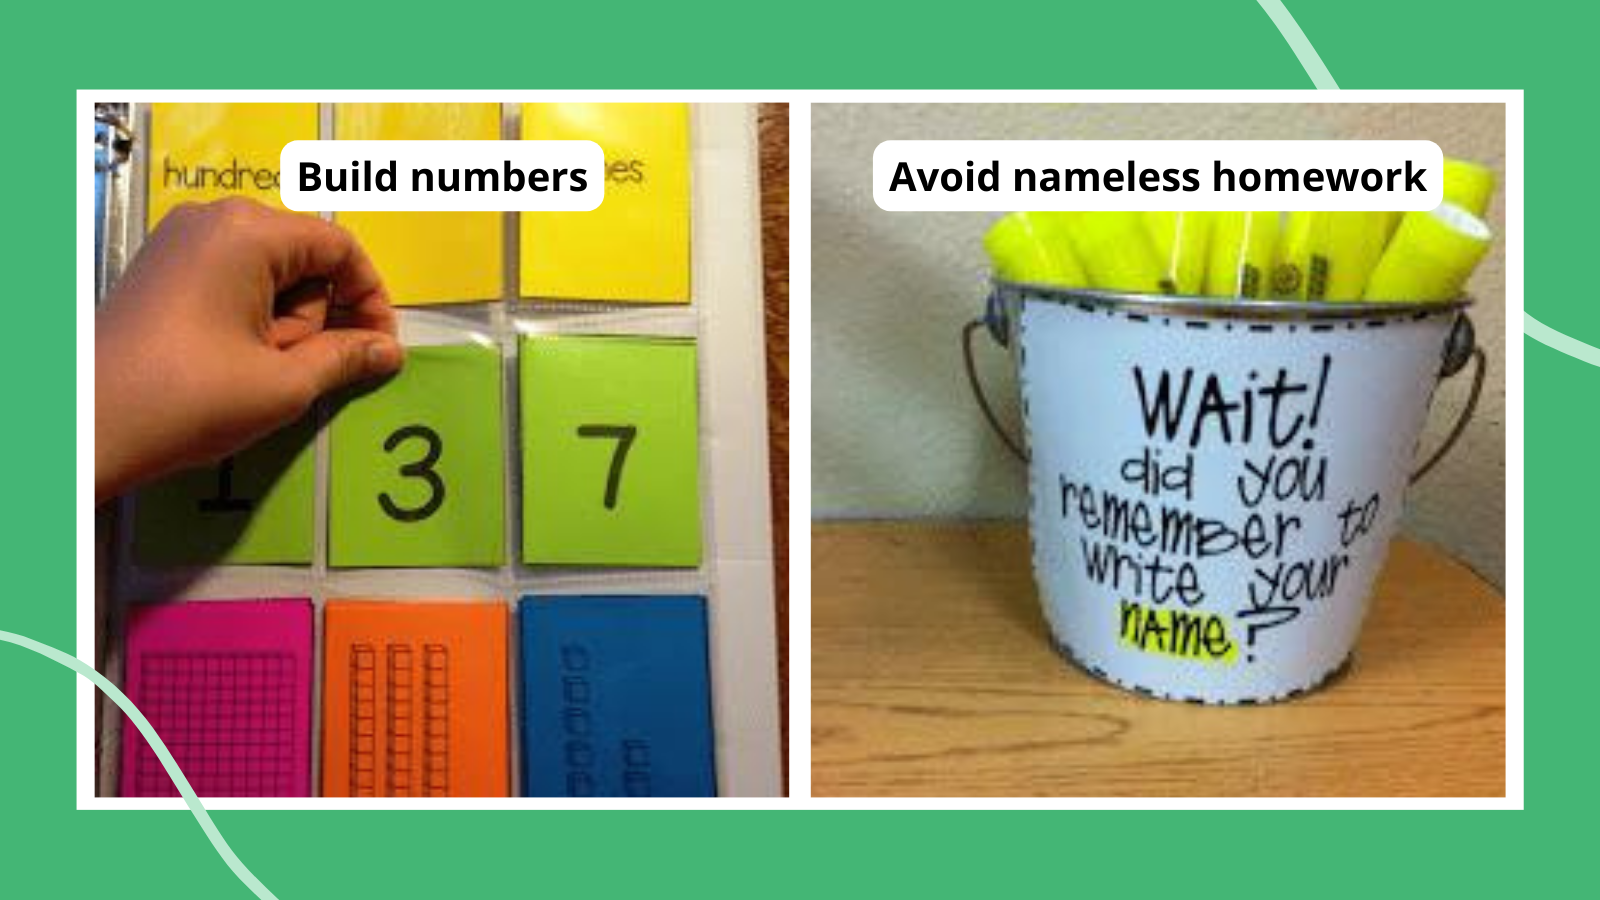 Tips for teaching second grade including building numbers with cards and putting names on papers with highlighters